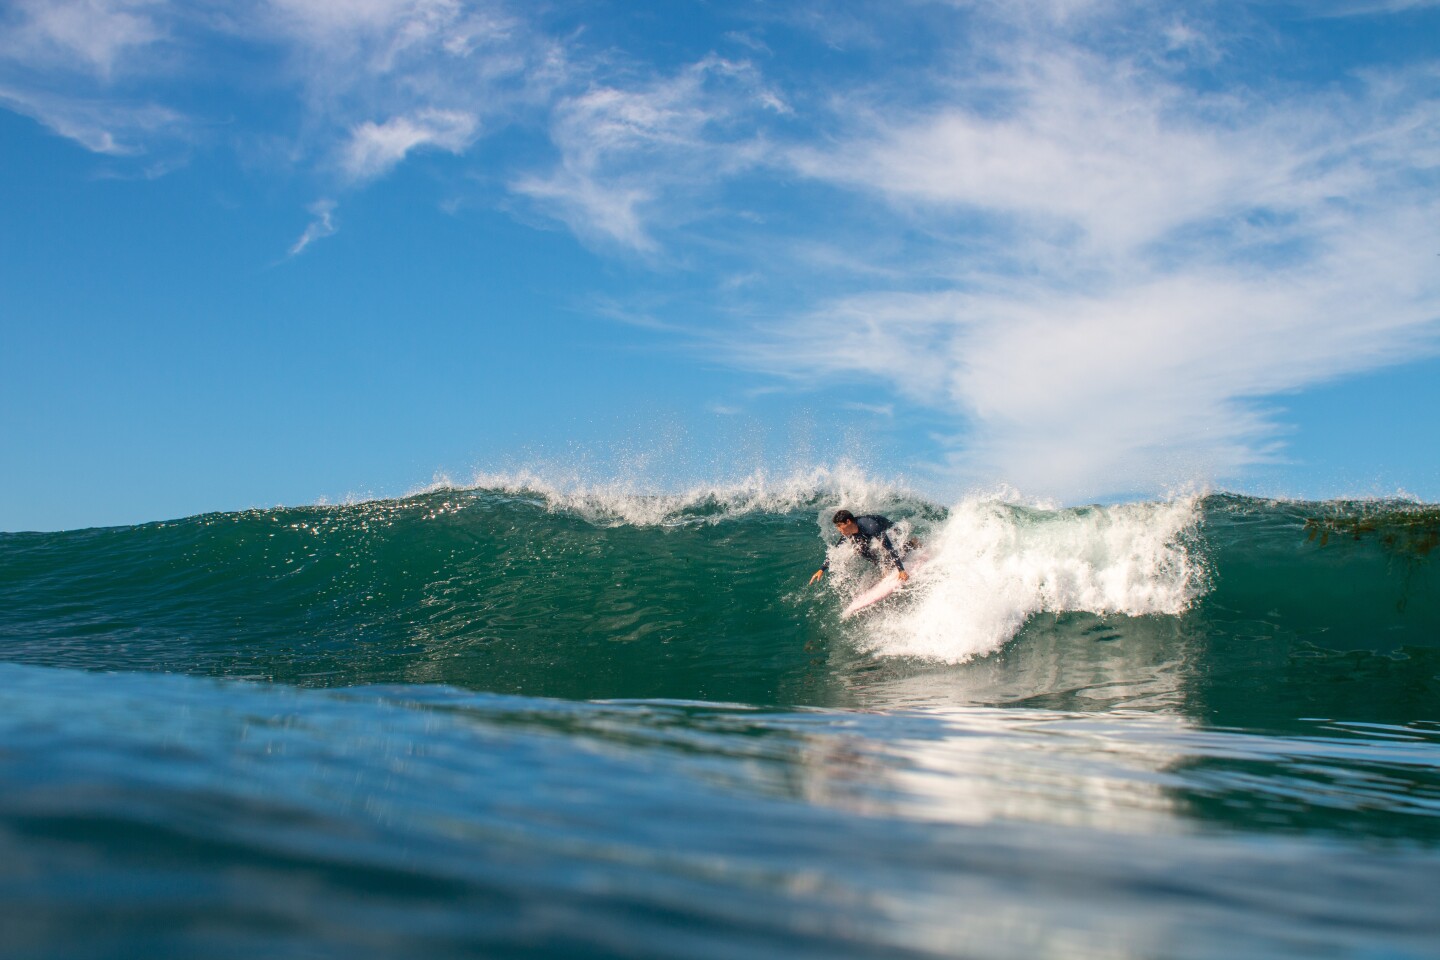 Summer's official start is about a month away, but surfing is always in season off Point Loma and Ocean Beach.